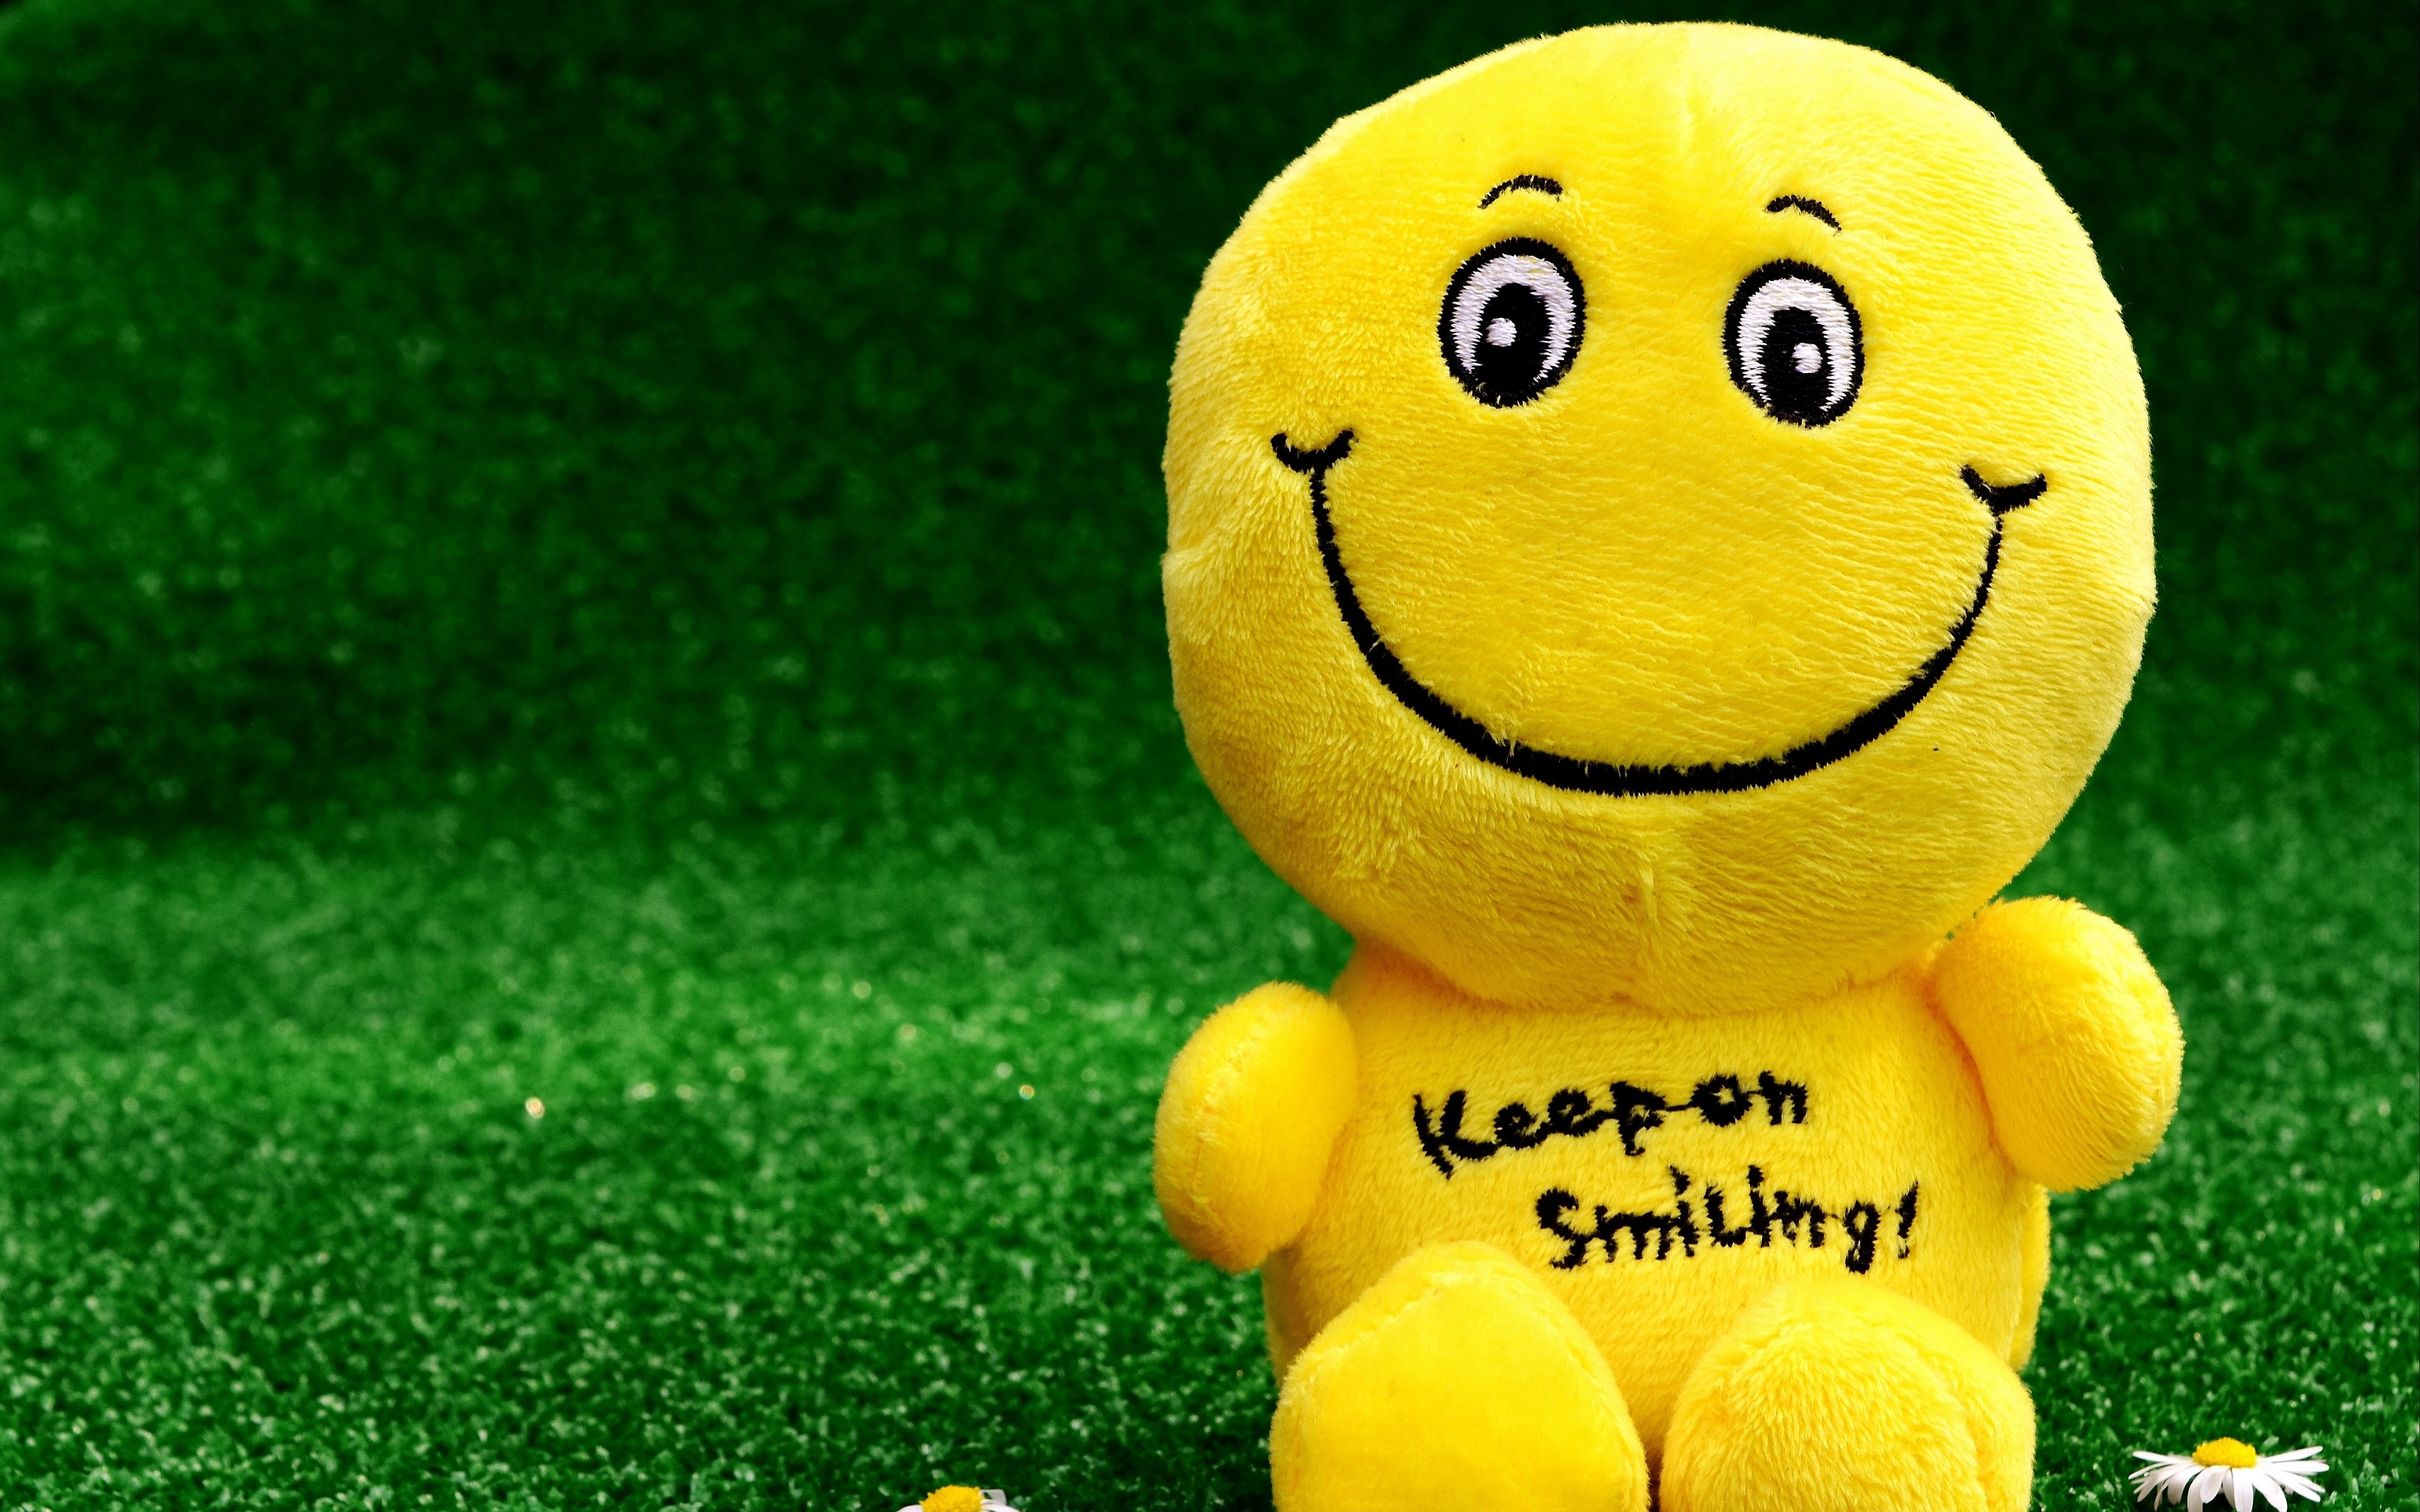 Download wallpaper Keep On Smiling, toy, 4k, smile, creative for desktop with resolution 3840x2400. High Quality HD picture wallpaper